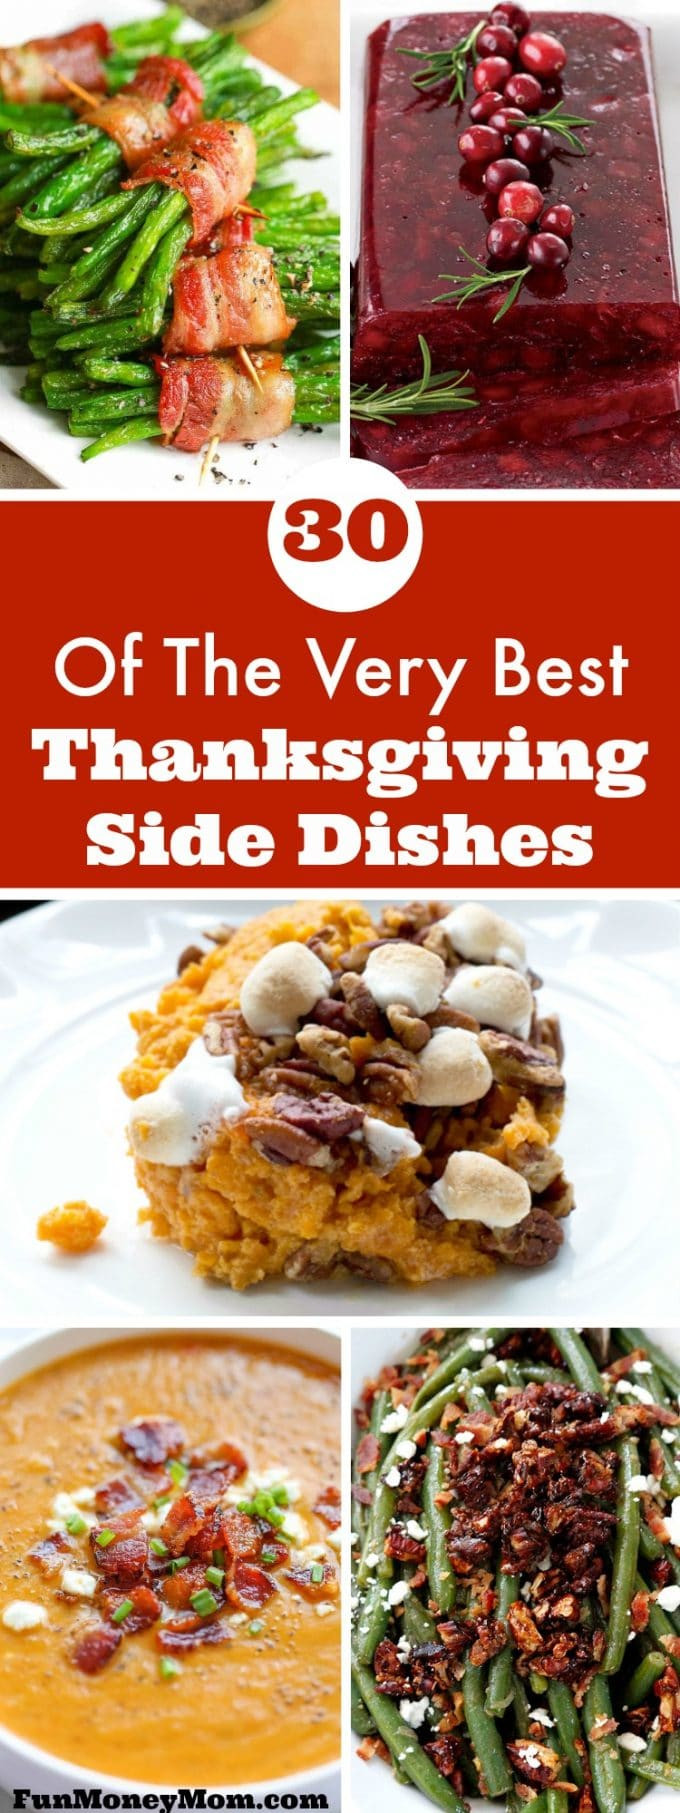 Amazing Thanksgiving Side Dishes
 The Best Thanksgiving Side Dishes For Your Holiday Celebration